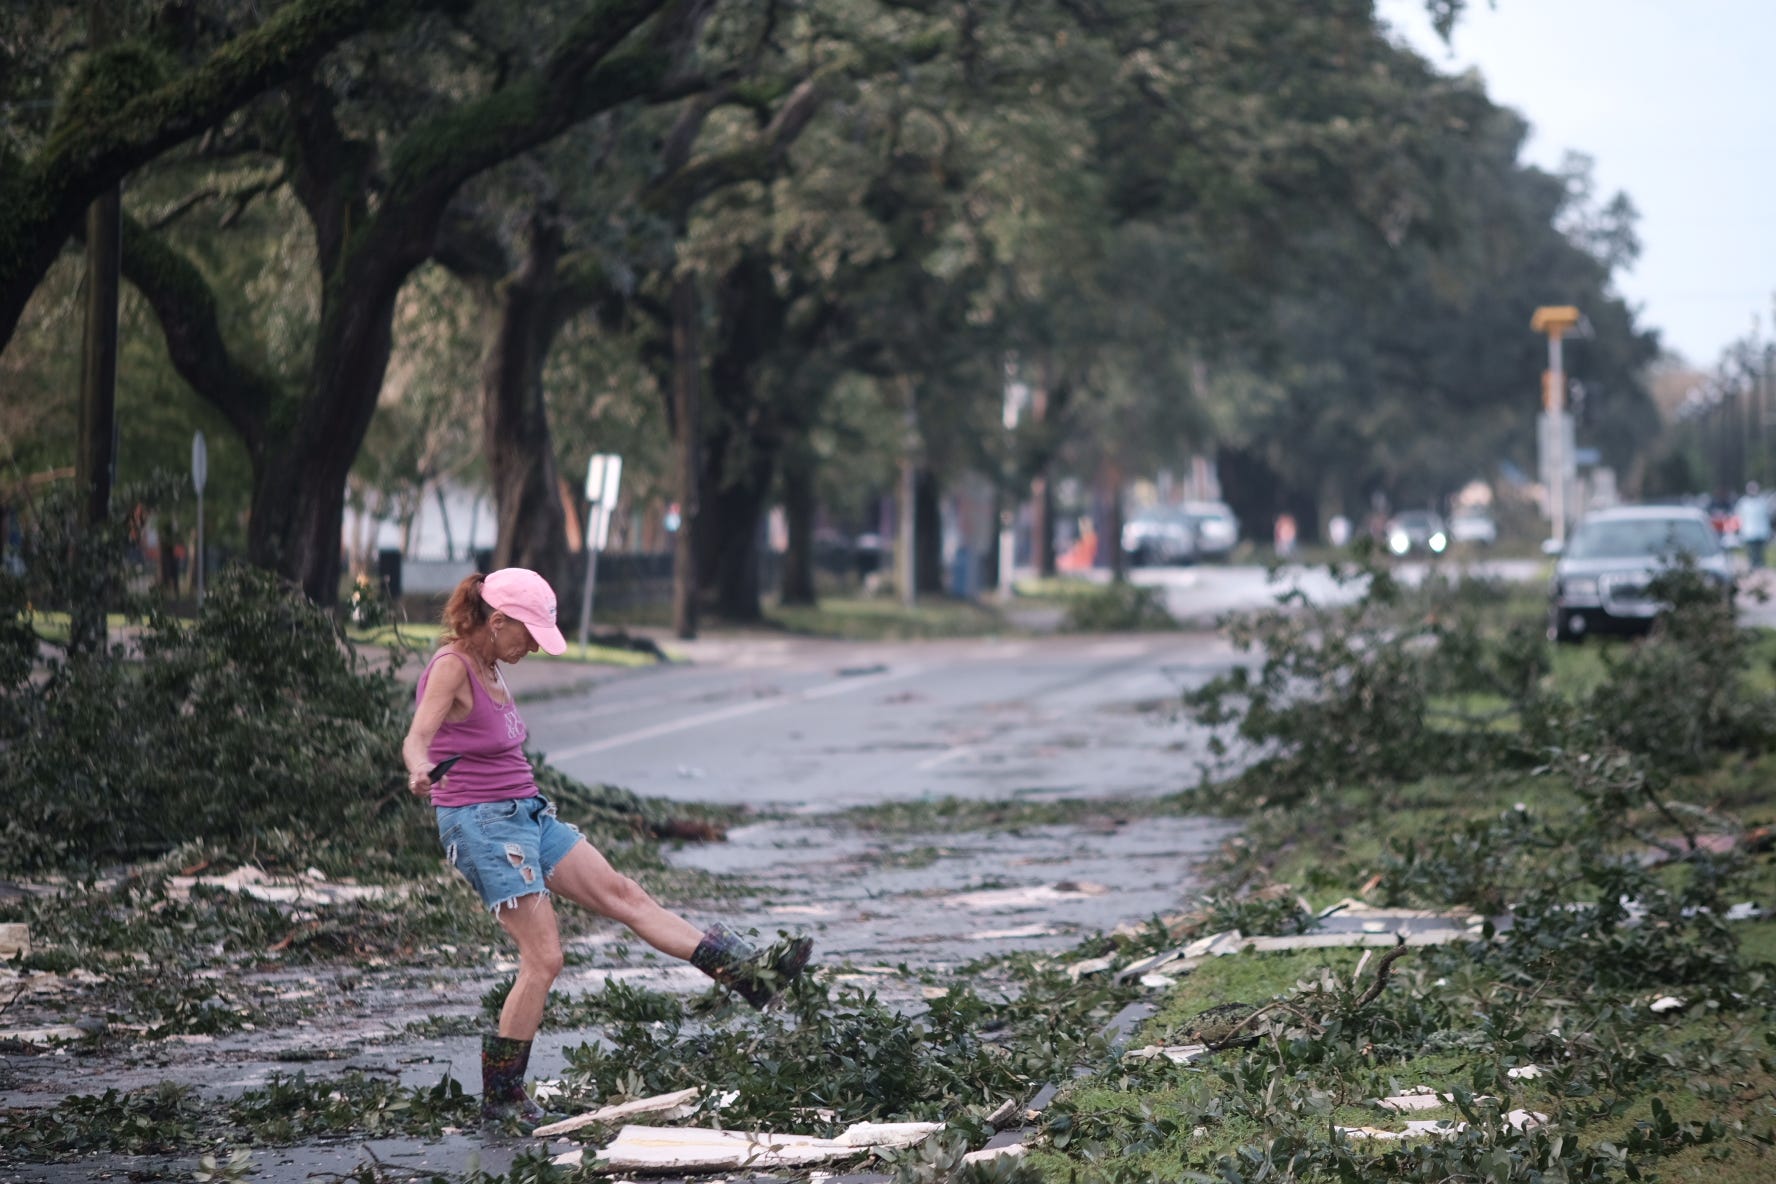 A woman is seen kicking fallen branches from the side of the road.